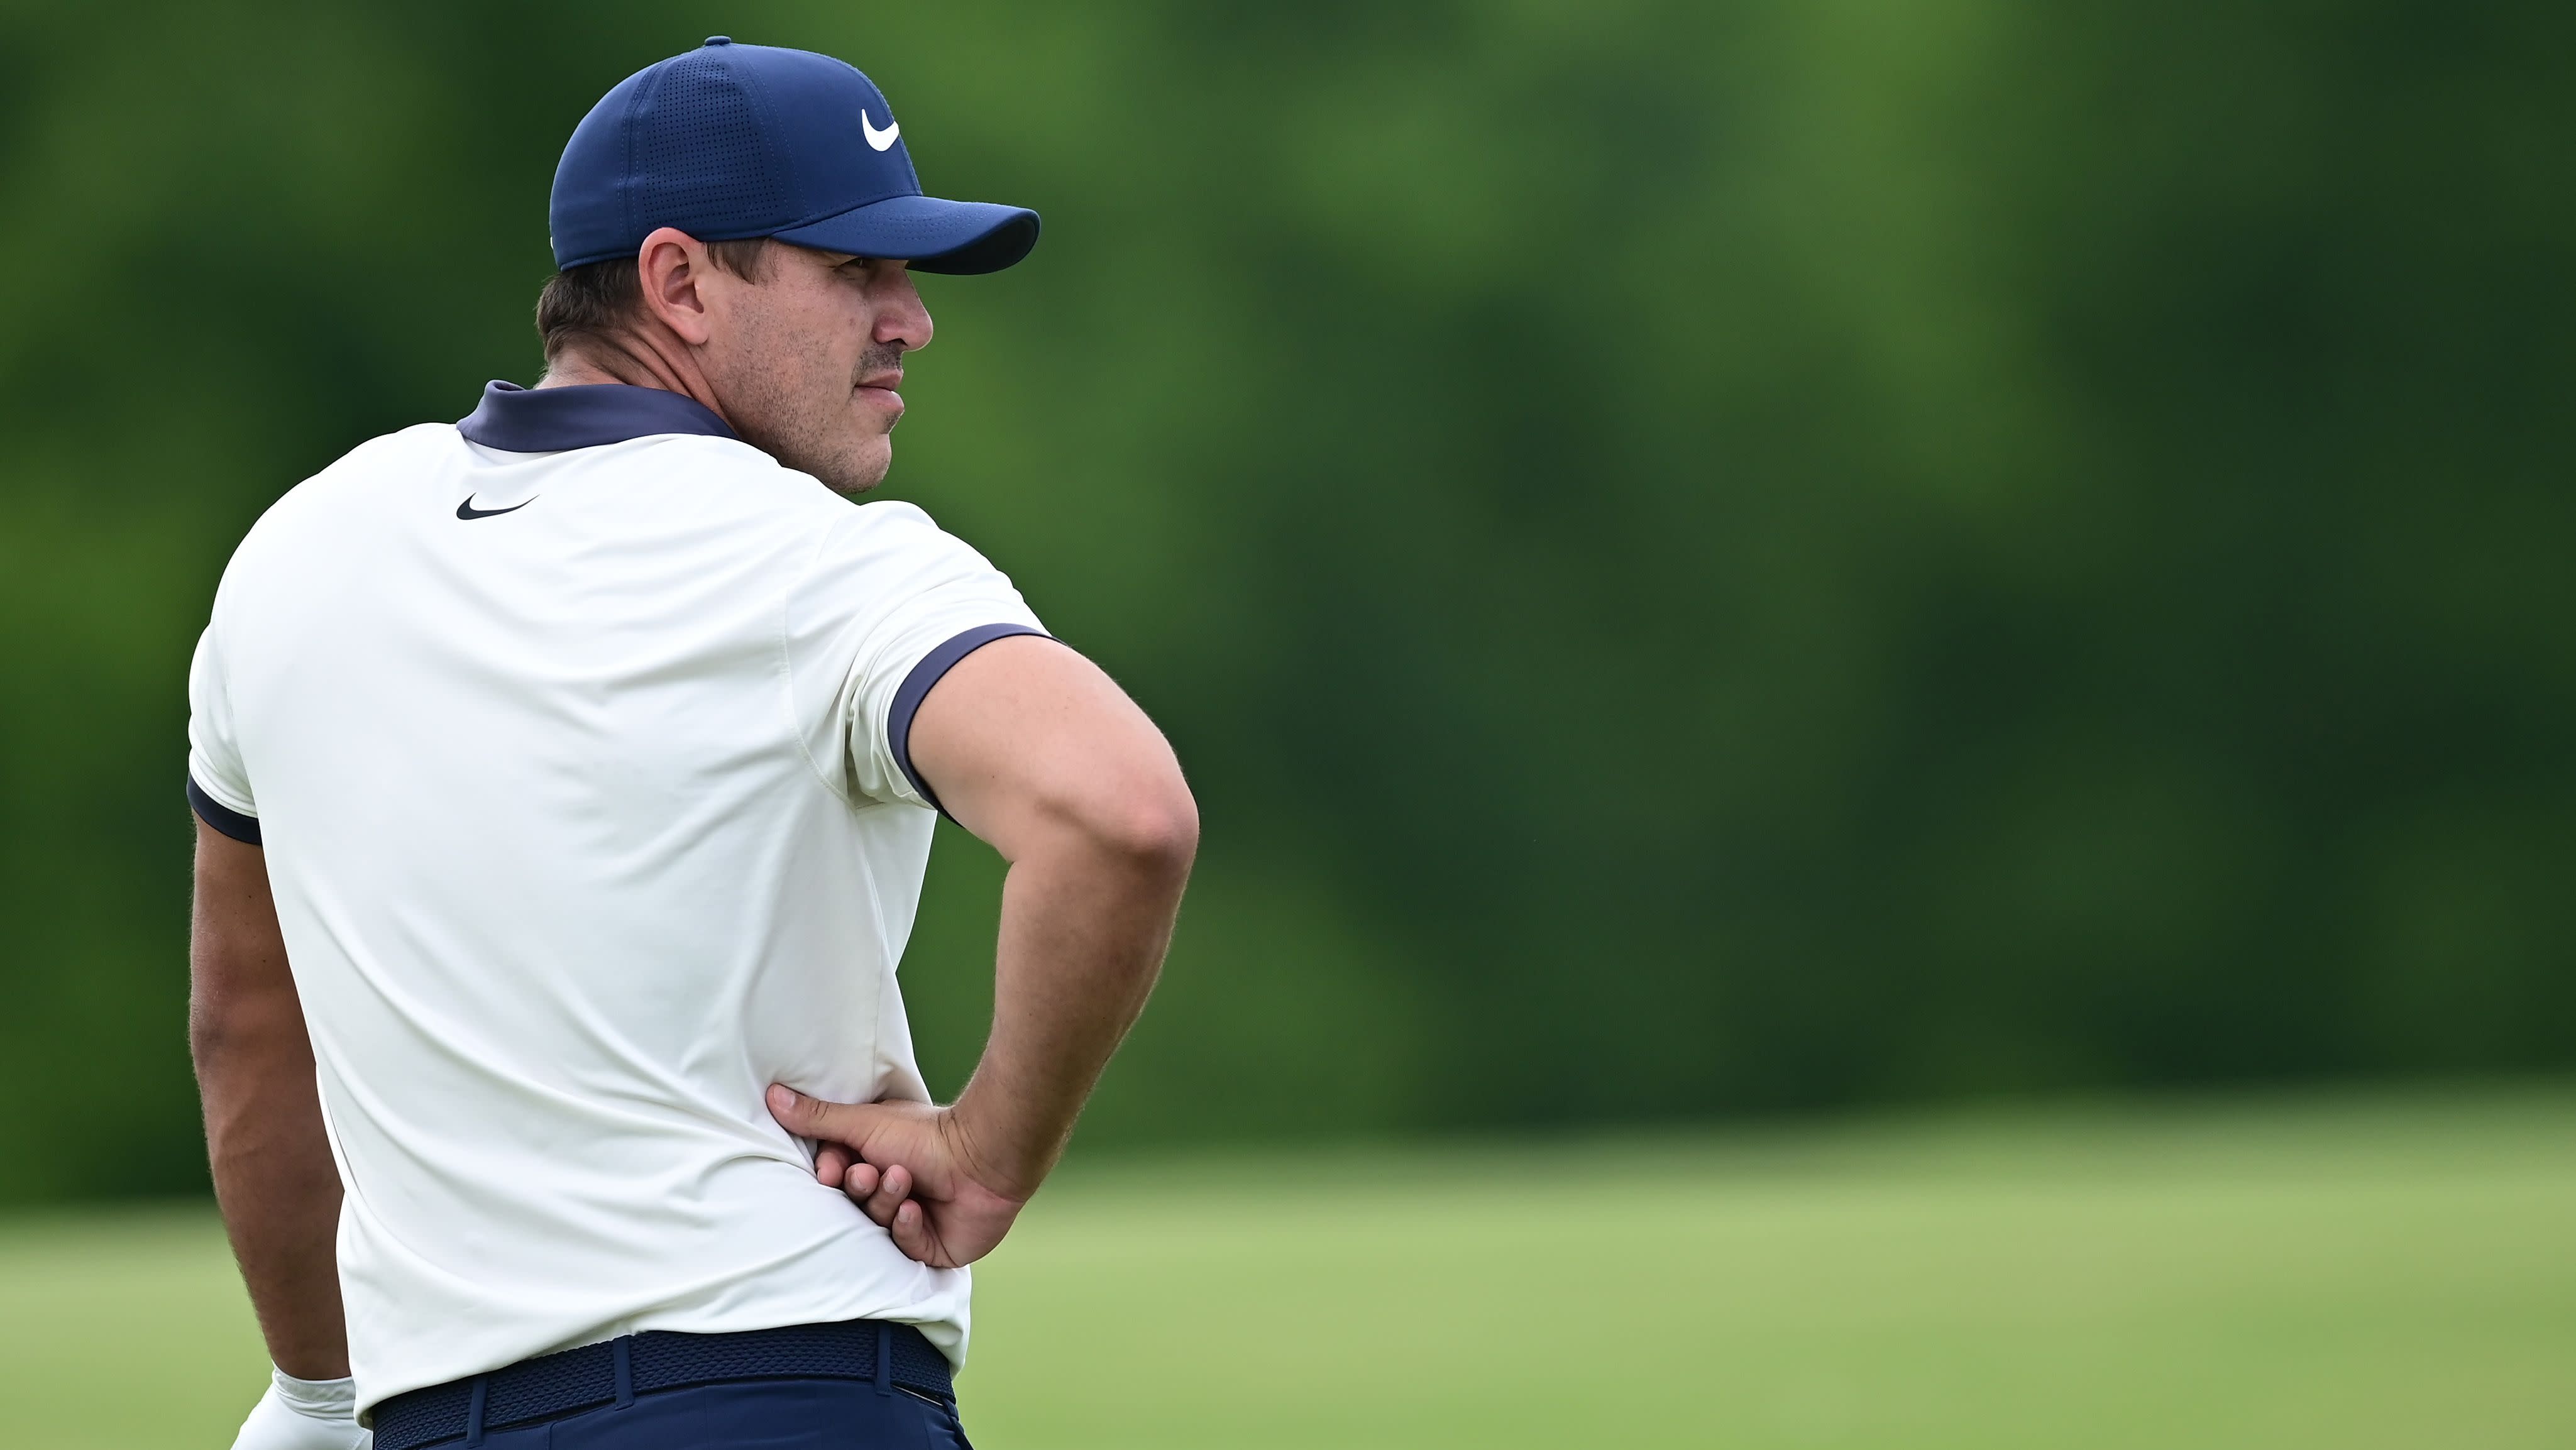 Live leaderboard: Byron Nelson Classic - Officialsportsbetting.com byron nelson leaderboard 2019